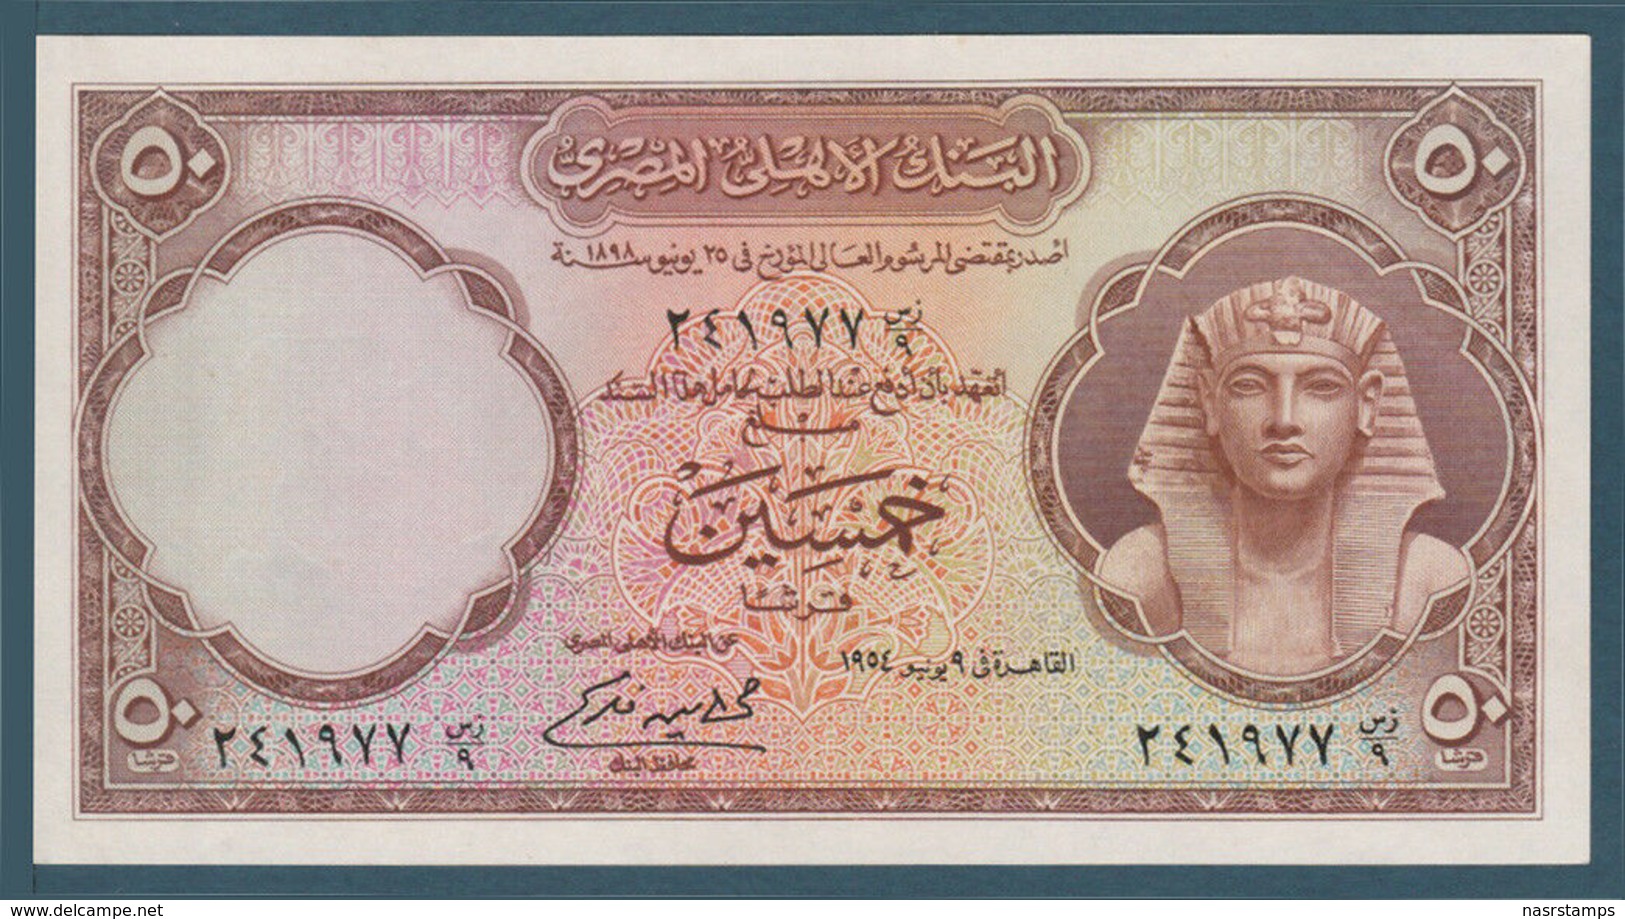 Egypt - 1954 - Very Rare - ( 50 Pt - Pick-29 - Sign #8 - Fekry ) - A/UNC - Egypte